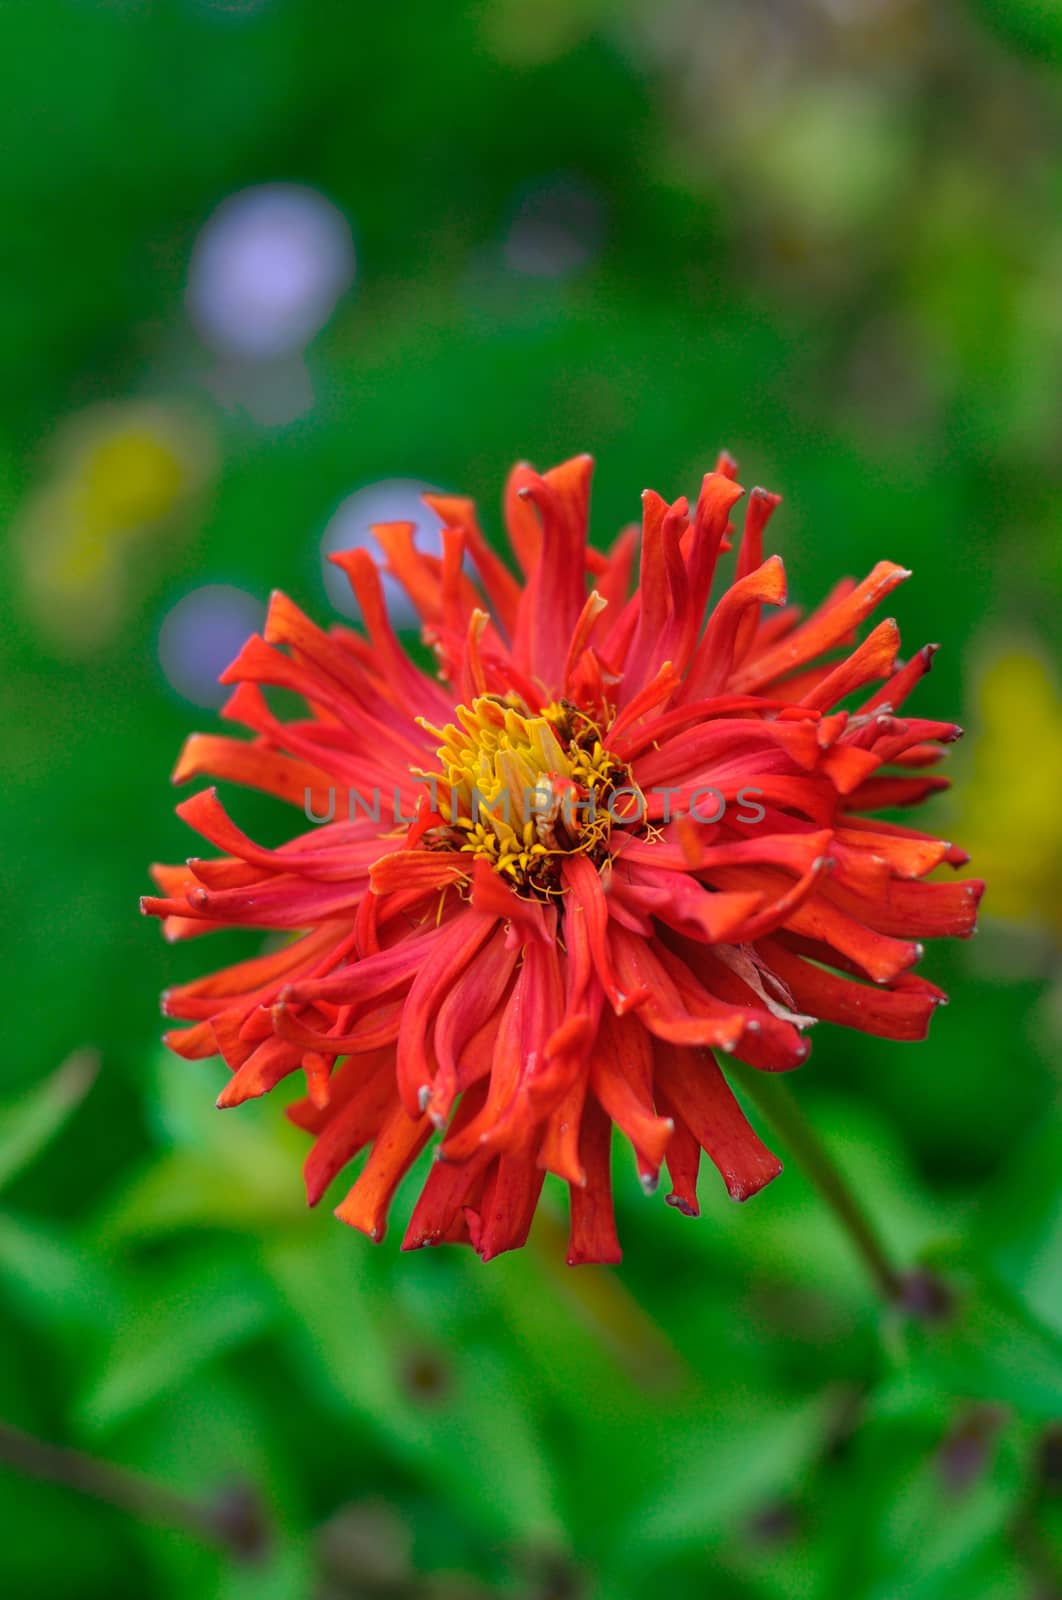 Red flower Zinnia close-up, Moscow Region, Russia by Eagle2308